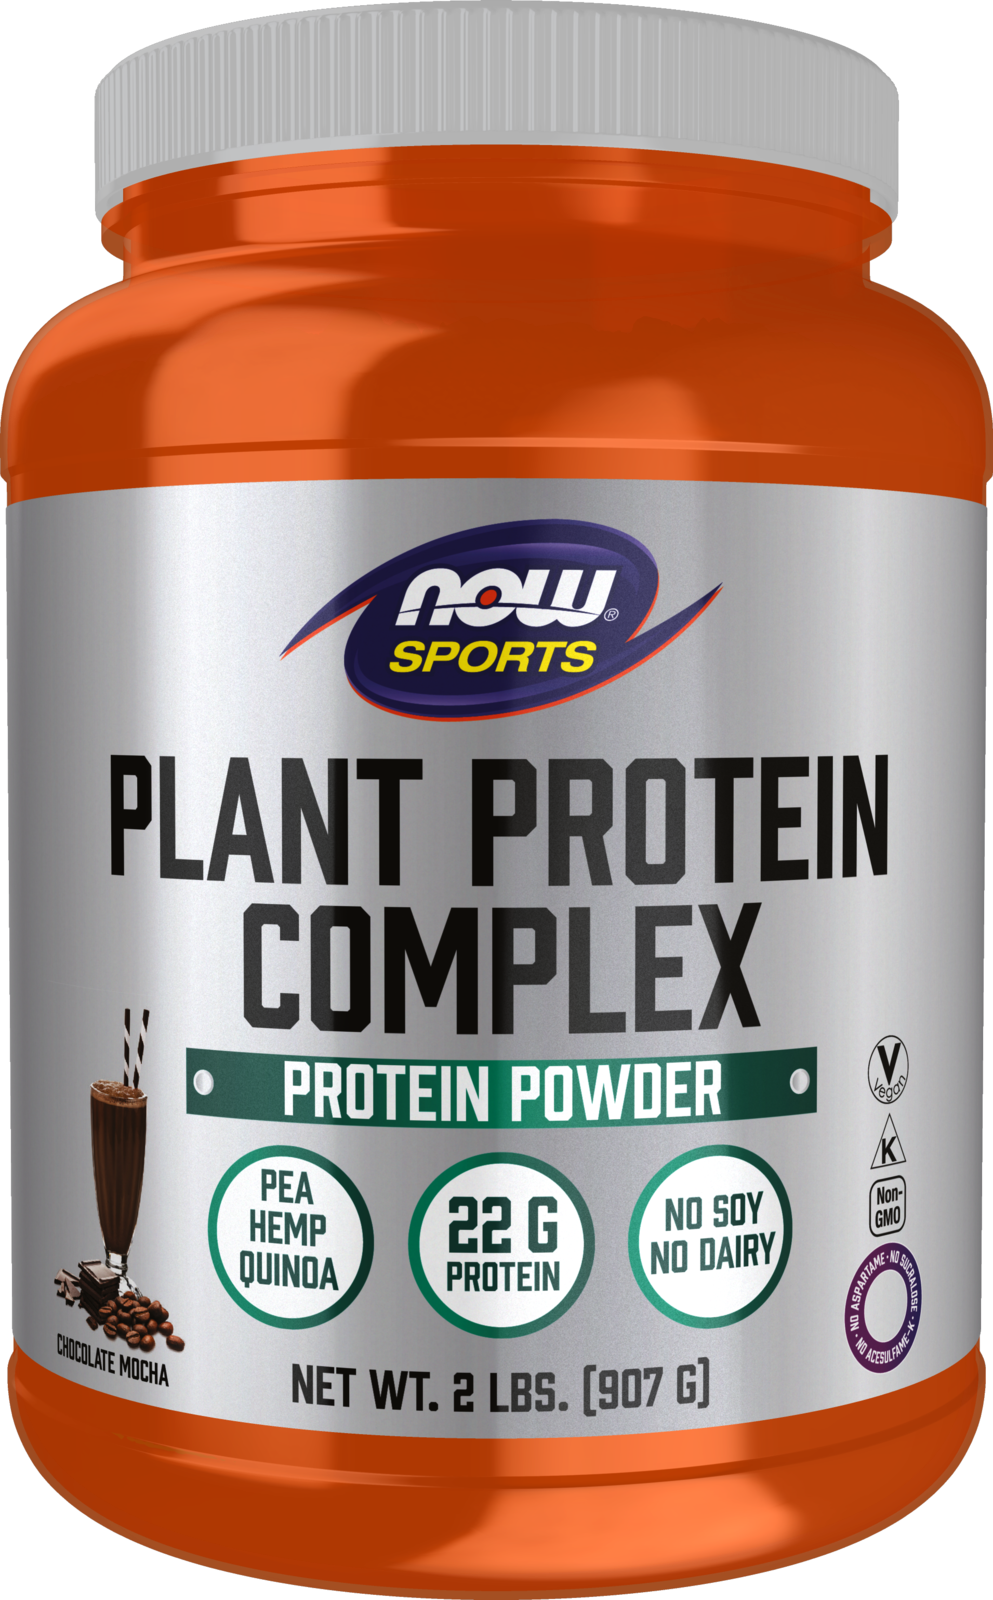 Plant Protein Complex, Chocolate Mocha Powder - 2 lbs. Bottle Front